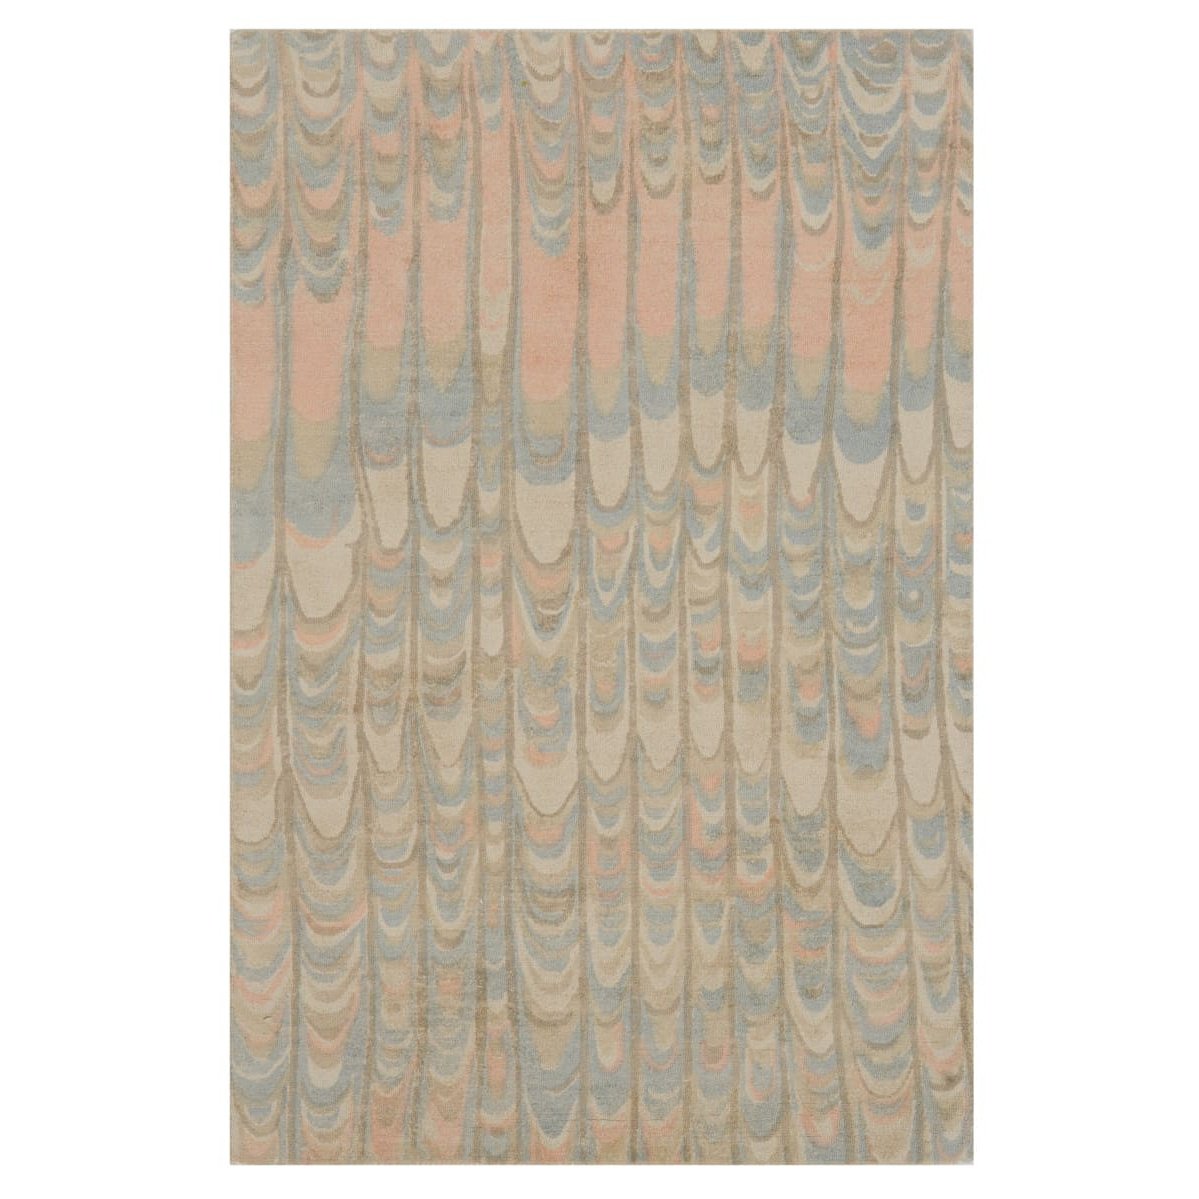 Tribal sunset Hand Tufted Wool Rug (5x8) By House of Rugs - Home Artisan